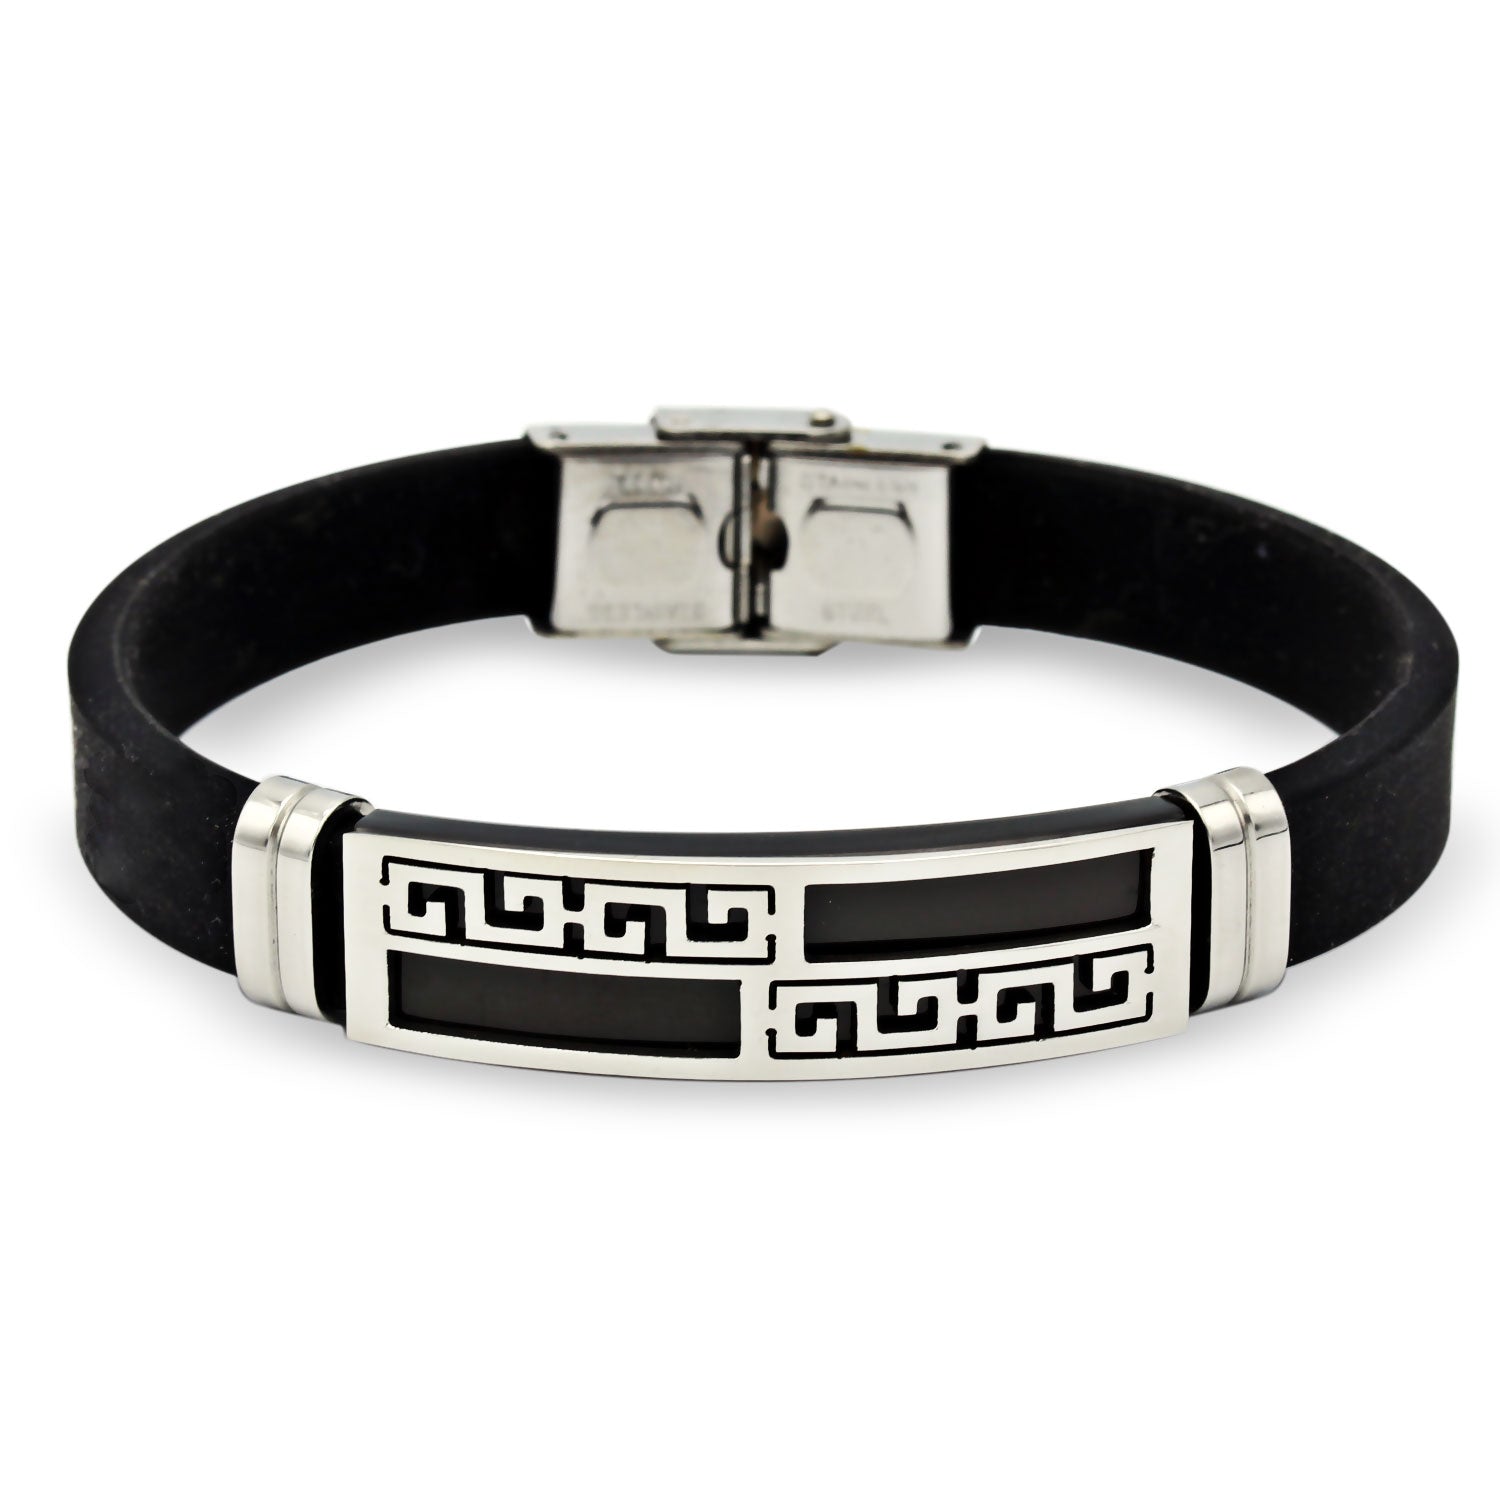 Stainless Steel Black Silver Plated Two Tone Design Rubber Bracelet